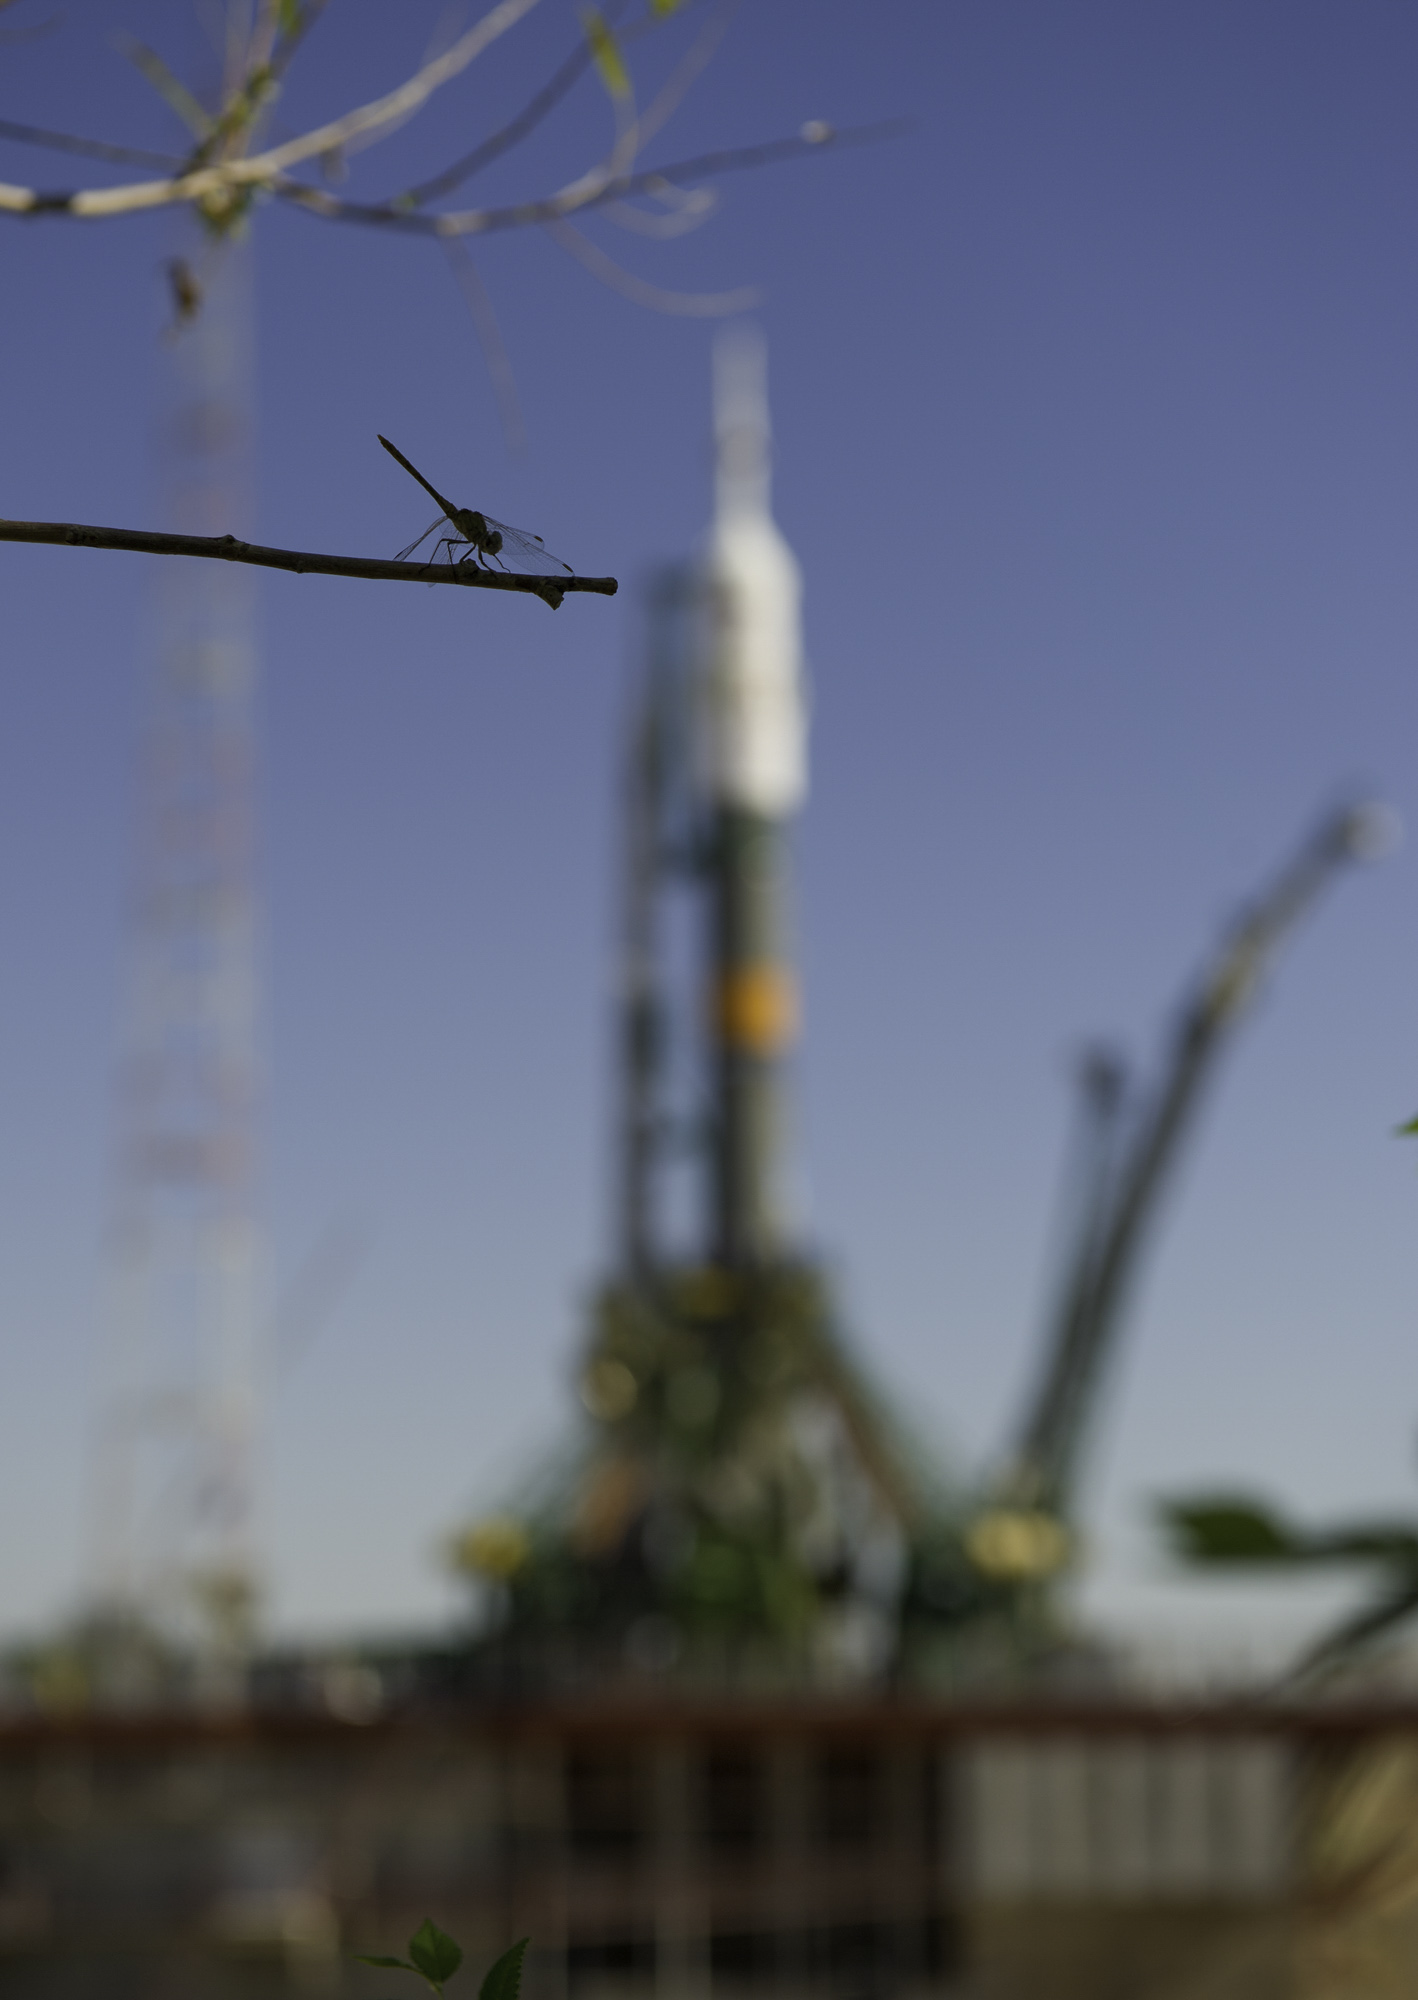  A dragonfly lights on a tree branch near the launch pad after the Soyuz TMA-05M is rolled to its launch pad at the Baikonur Cosmodrome, Thursday, July 12, 2012 in Kazakhstan. The launch of the Soyuz rocket is scheduled for the morning of July 15 loc